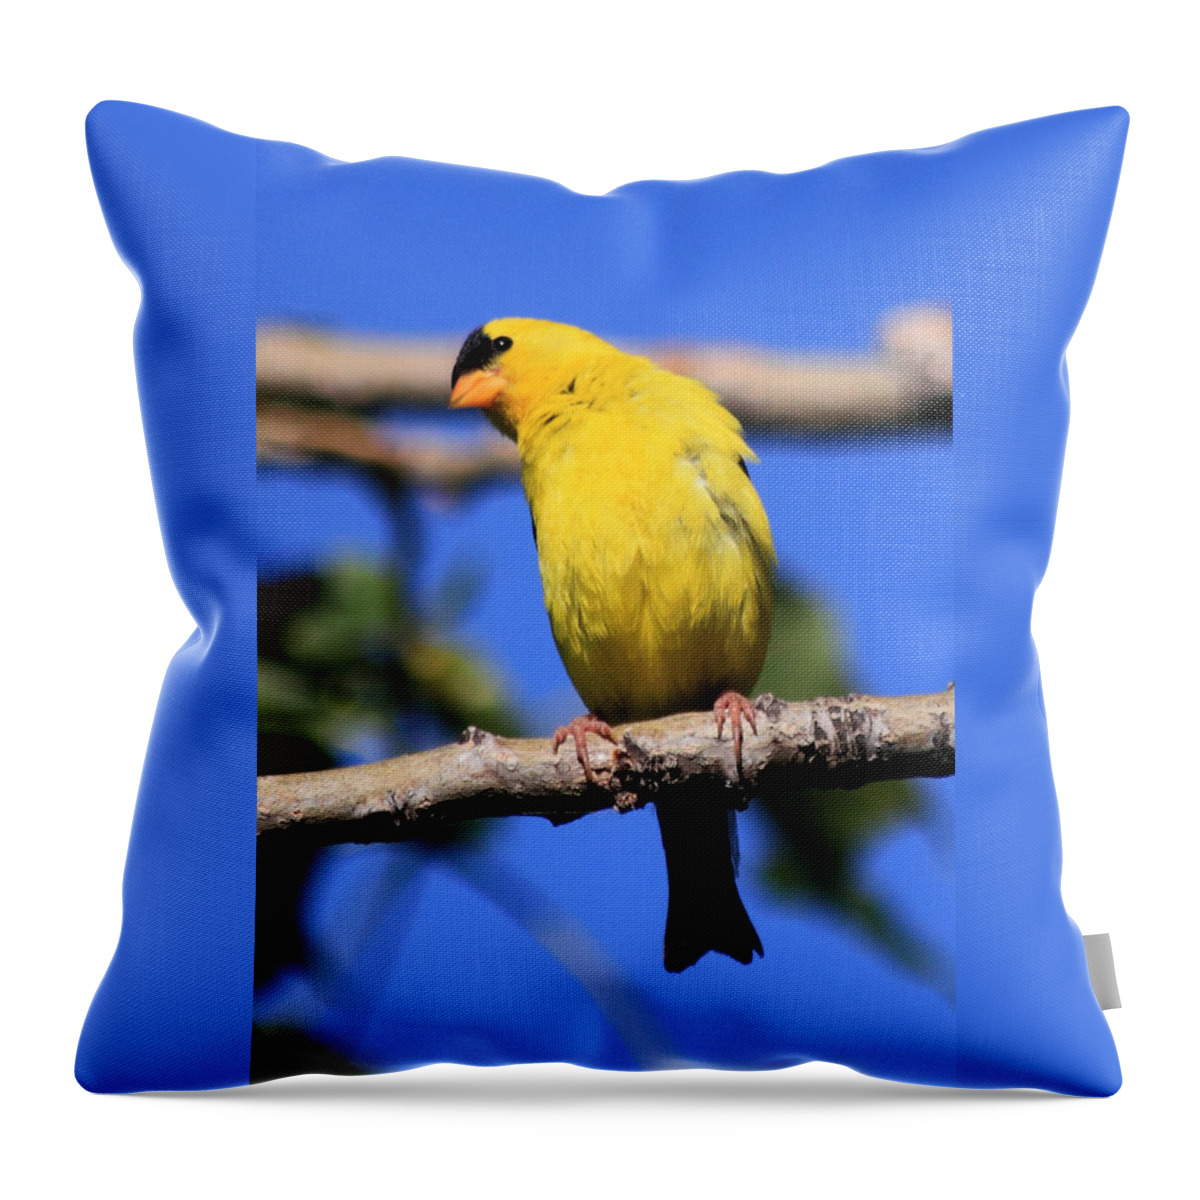 American Goldfinch Throw Pillow featuring the photograph American Goldfinch by Shane Bechler